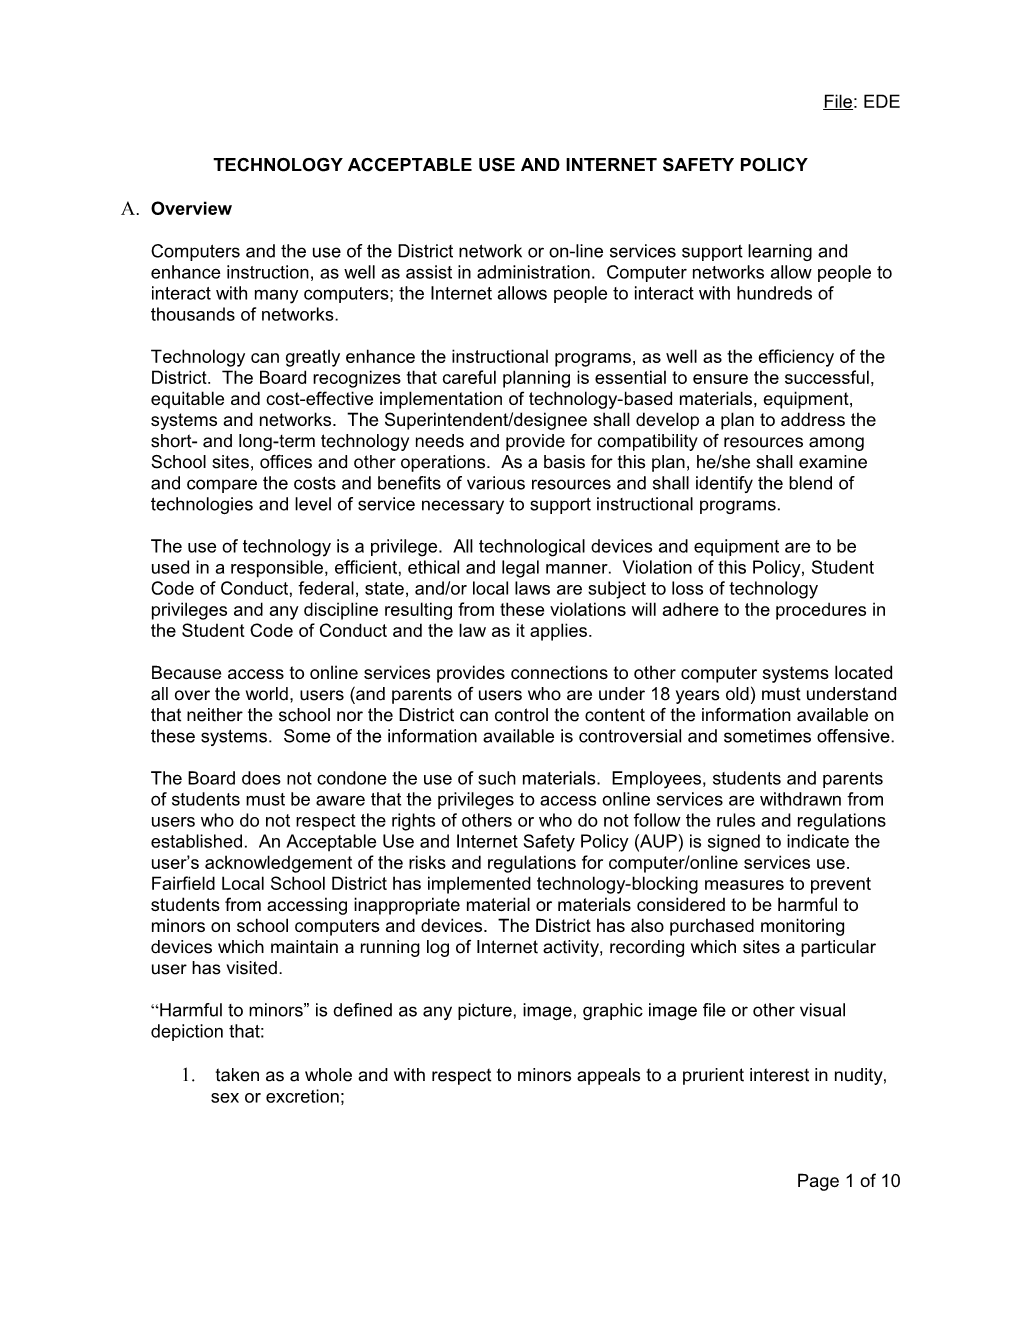 Technology Acceptable Use and Internet Safety Policy